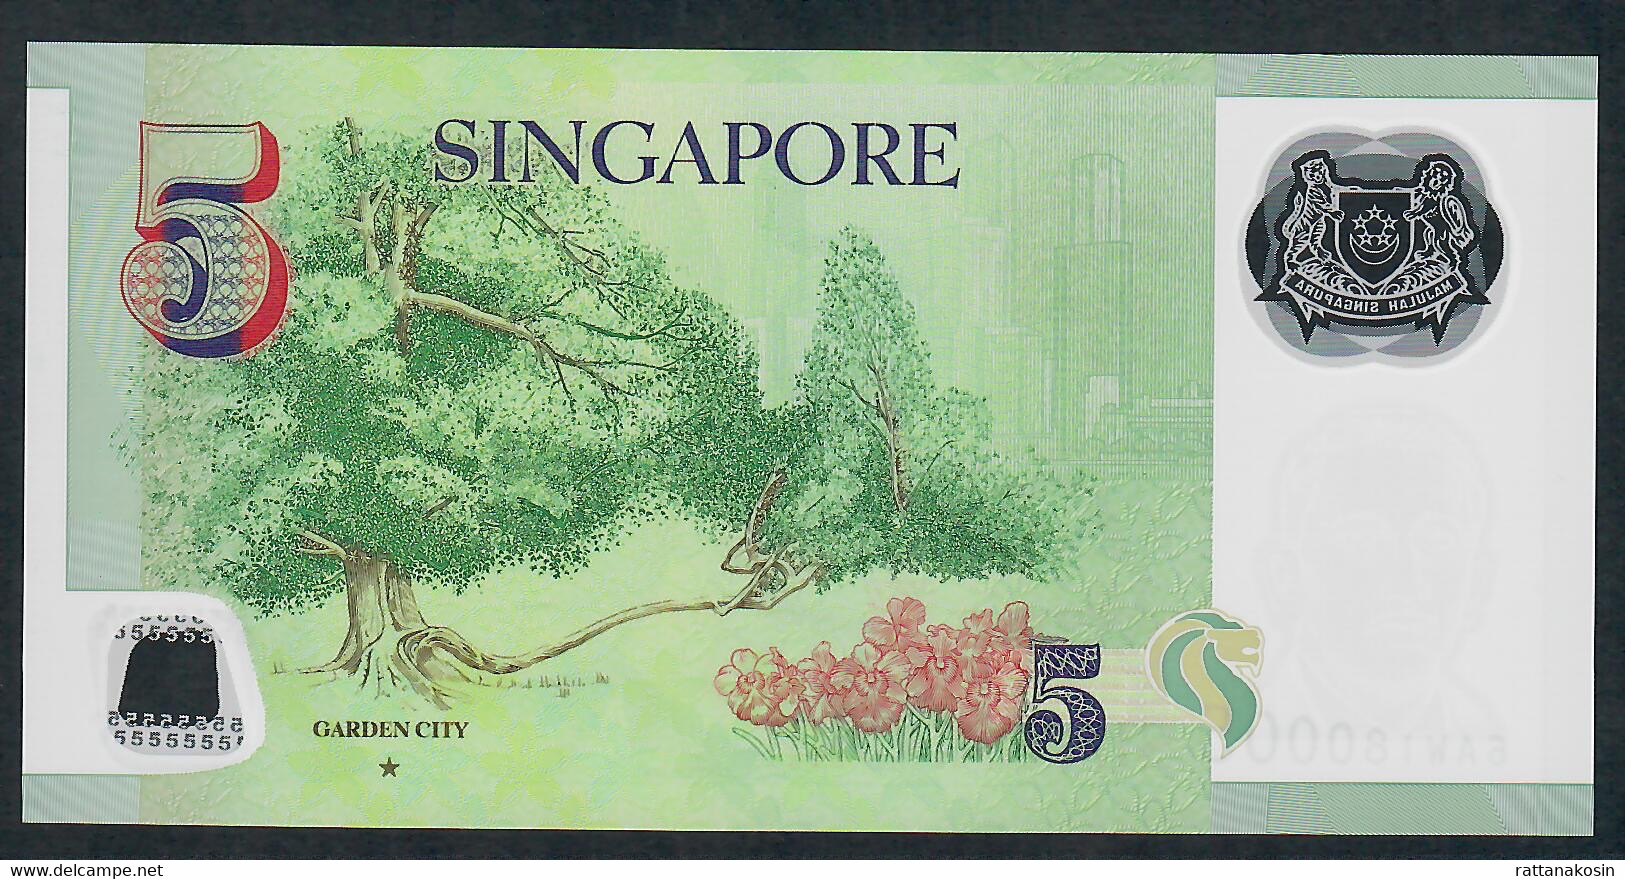 SINGAPORE P47f 5 DOLLARS 2007  1 Star/Back #5AW Issued 2020 UNC. - Singapore